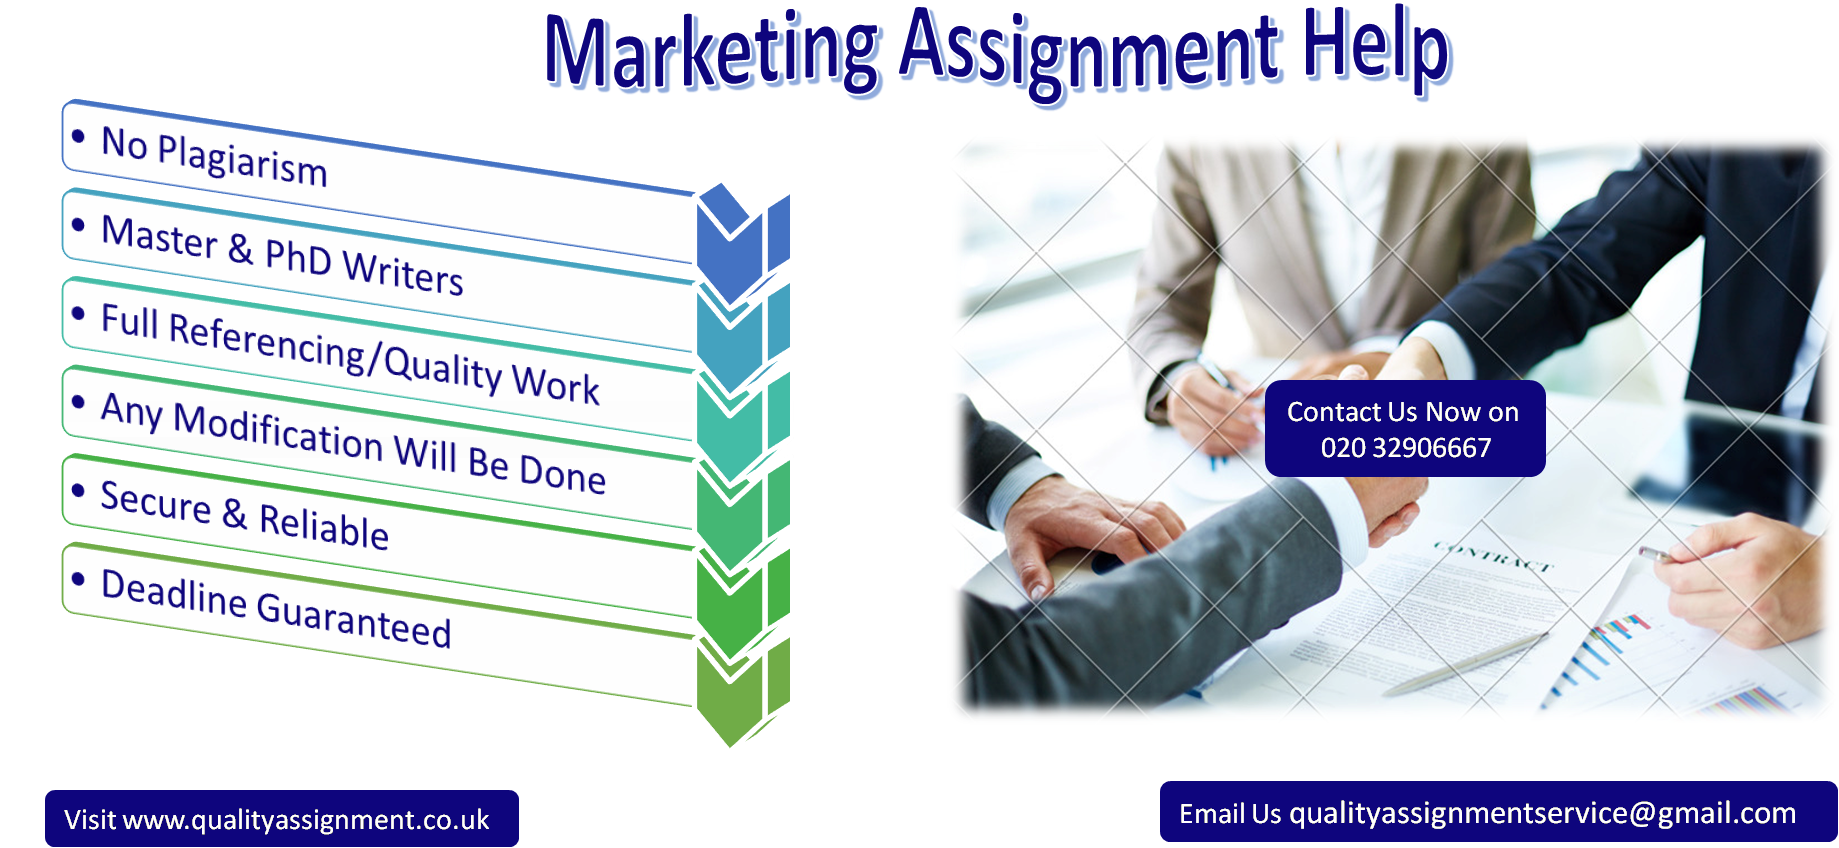 Marketing Assignment Help by top UK experts | Quality Assignment